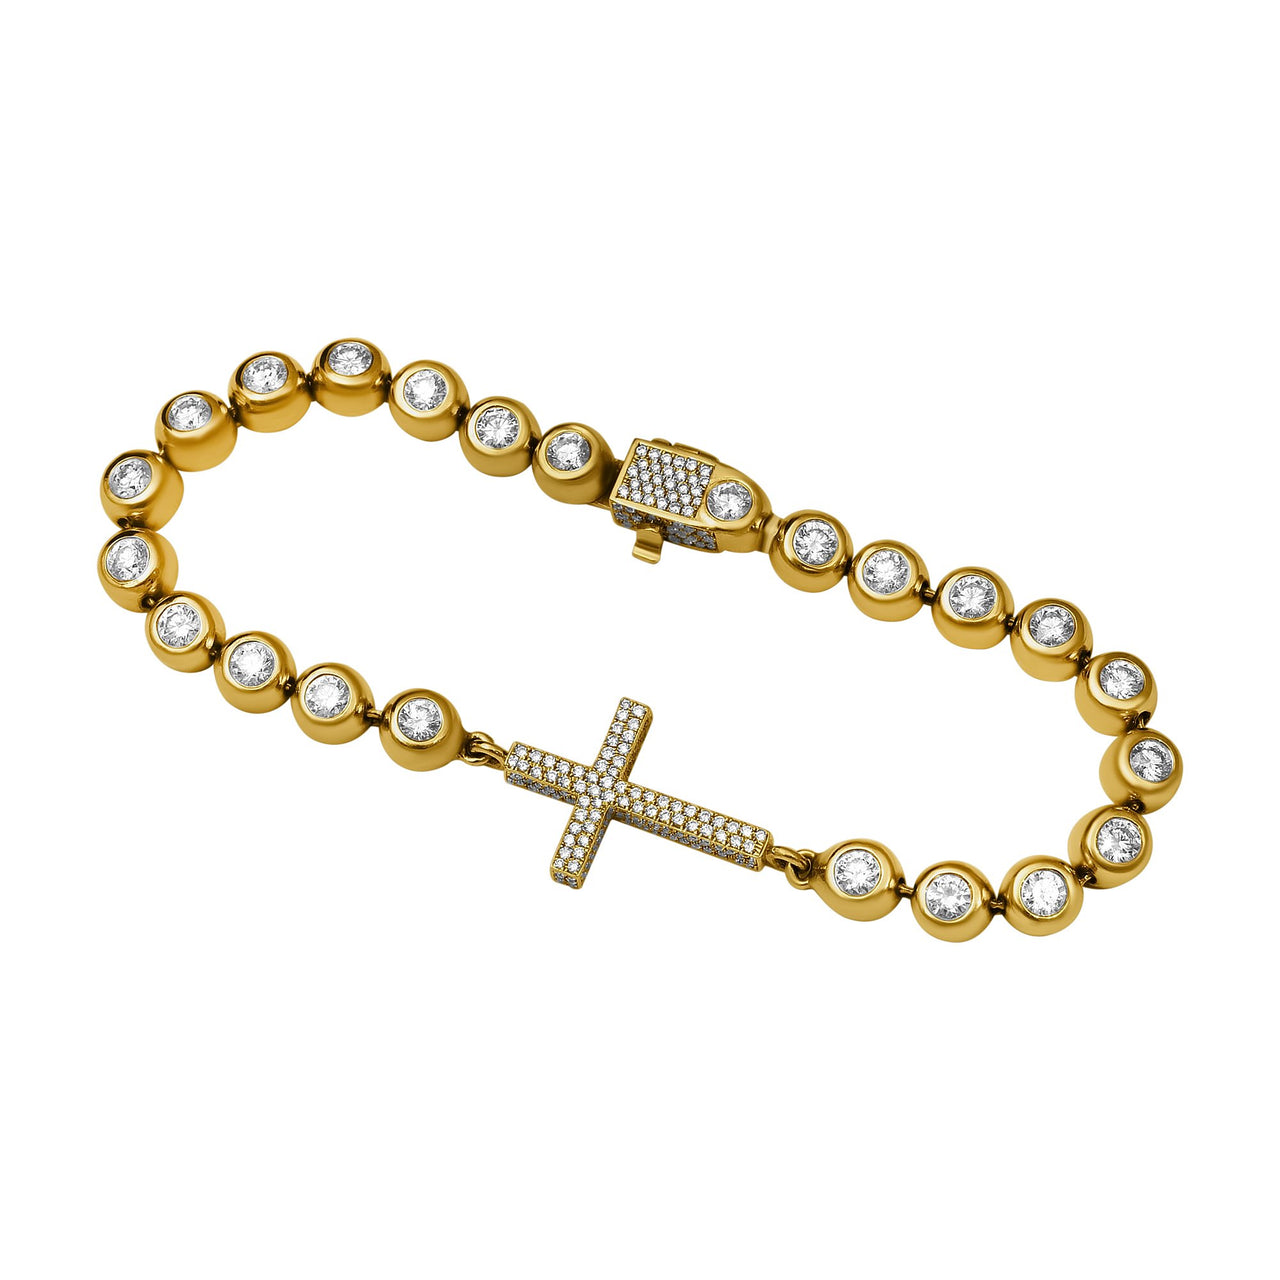 Buy JwlDazz Cross Bracelet of Faith and Hope Adjustable fit for all Silver  Cross (Unisex) at Amazon.in